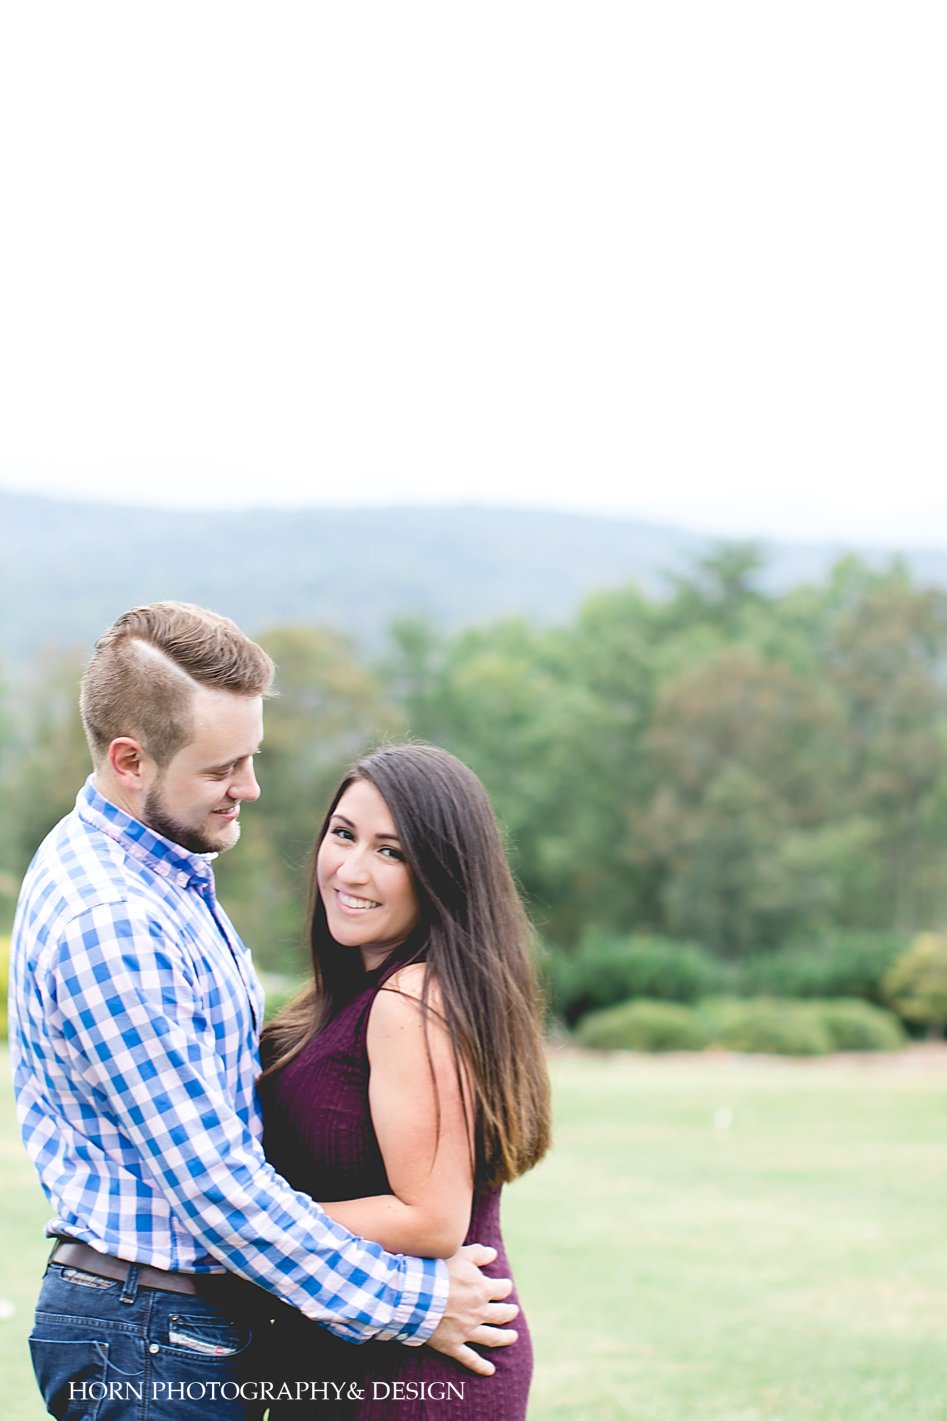 Dahlonega engagement shoot what to wear, Horn Photography and Design, Fall